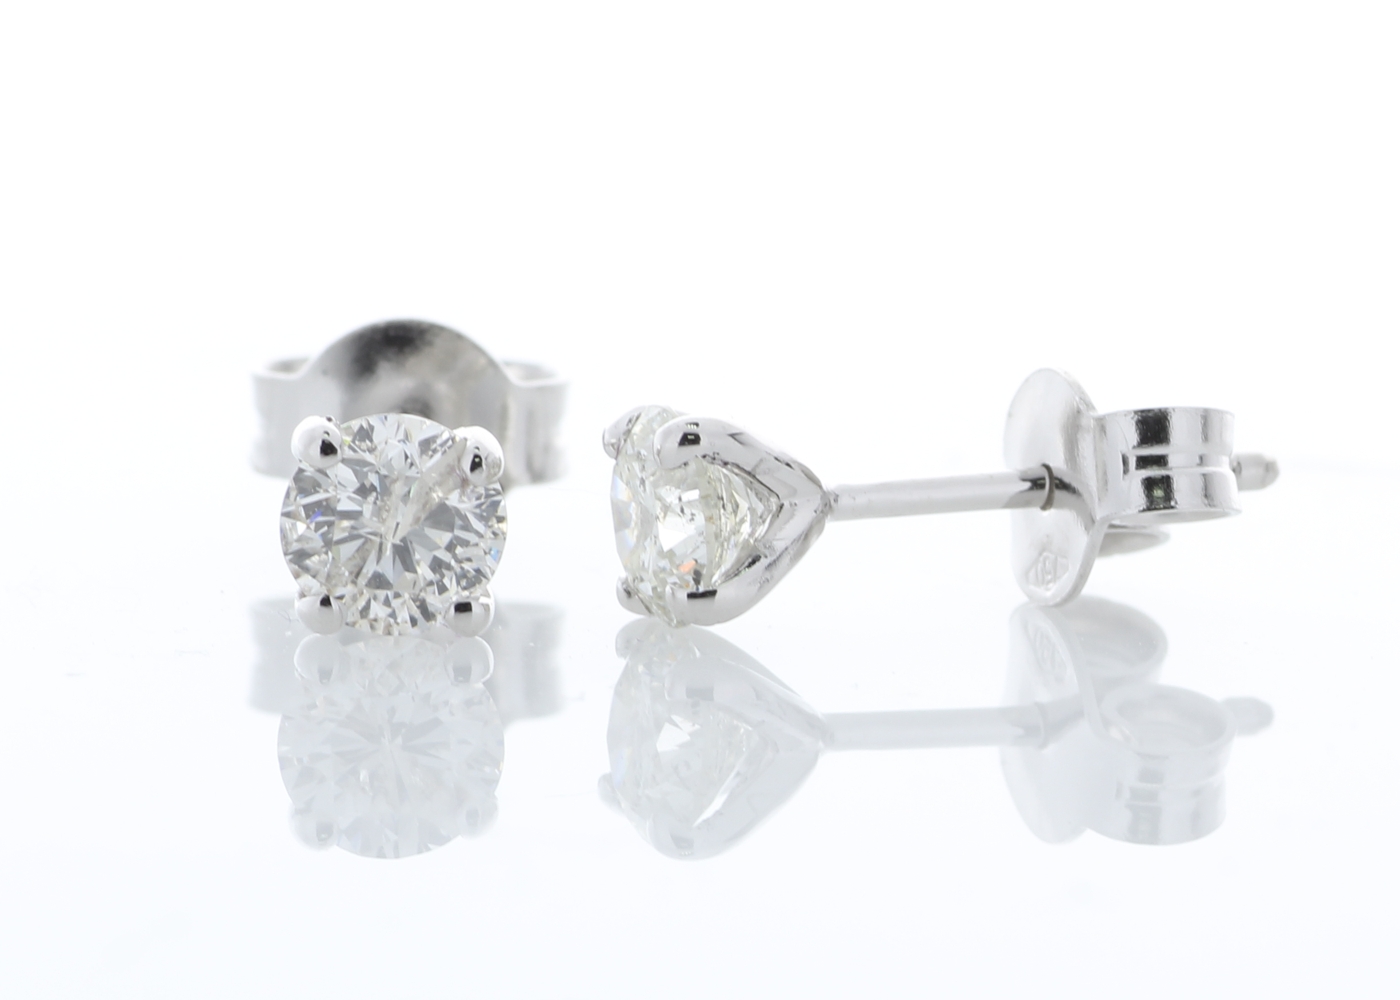 18ct White Gold Single Stone Prong Set Diamond Earring 0.80 Carats - Valued By GIE £8,550.00 - Two